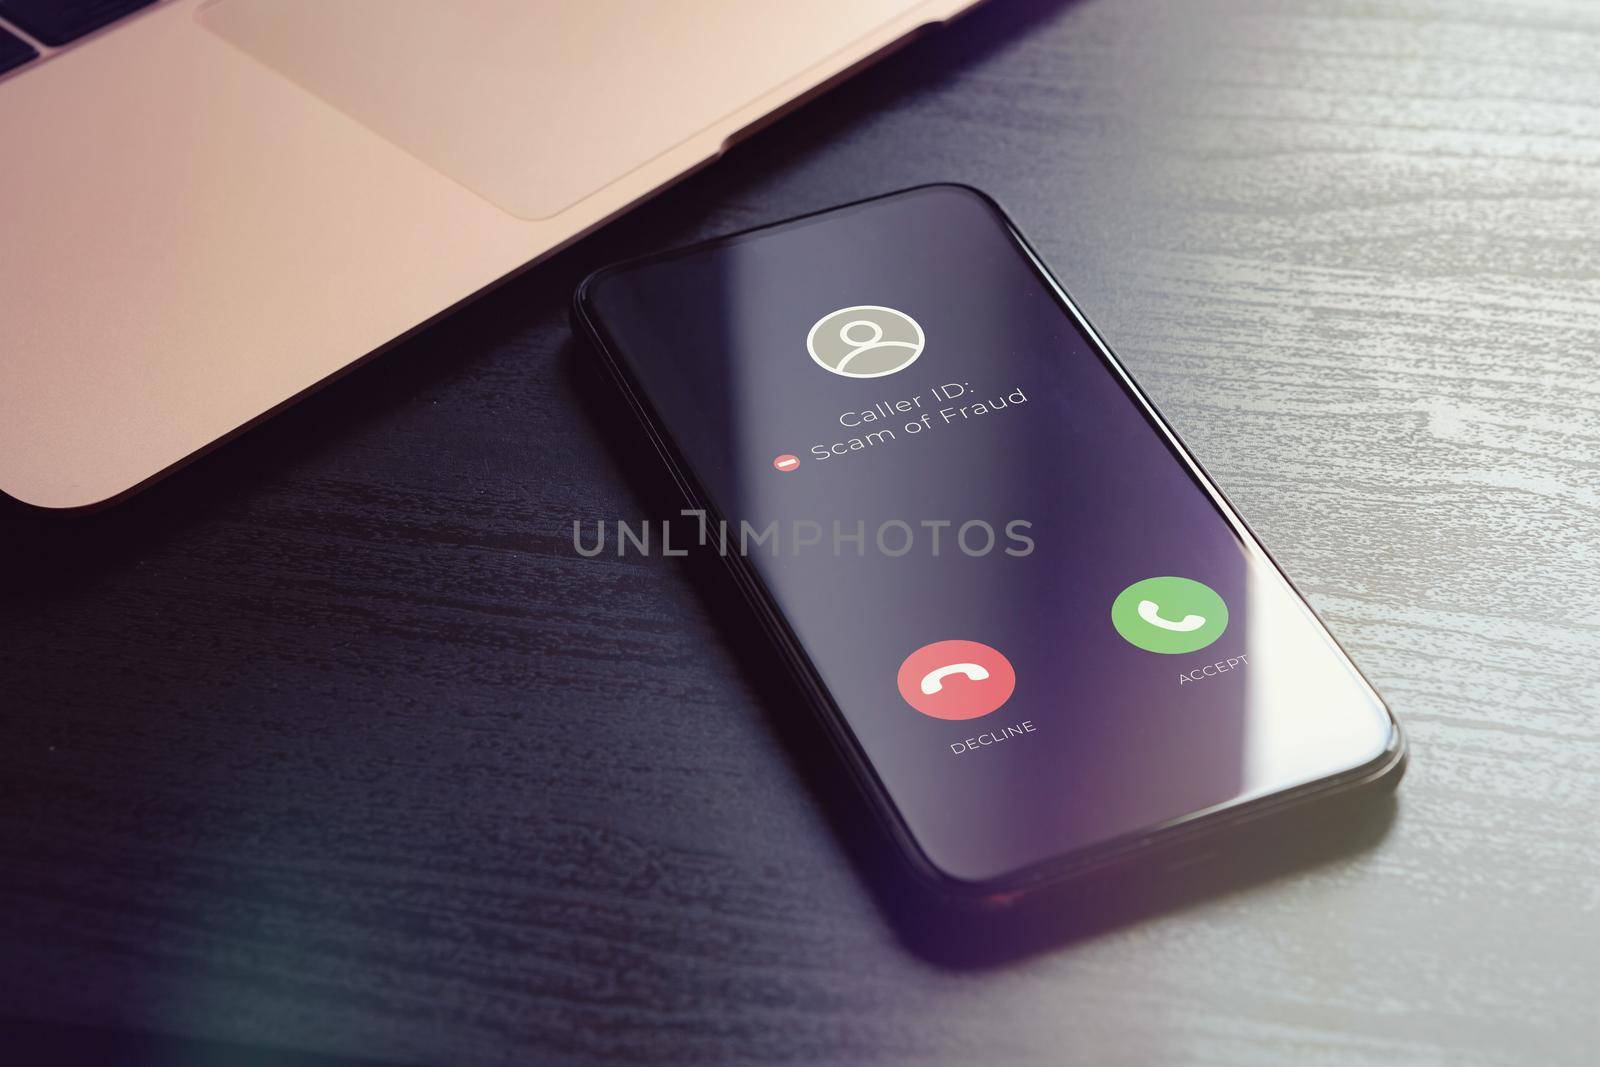 Scam fishing phone call from unknown number that was identified by a security anti-scam app as alert and fraudulent. Block Scam and Unwanted Calls concept. High quality photo